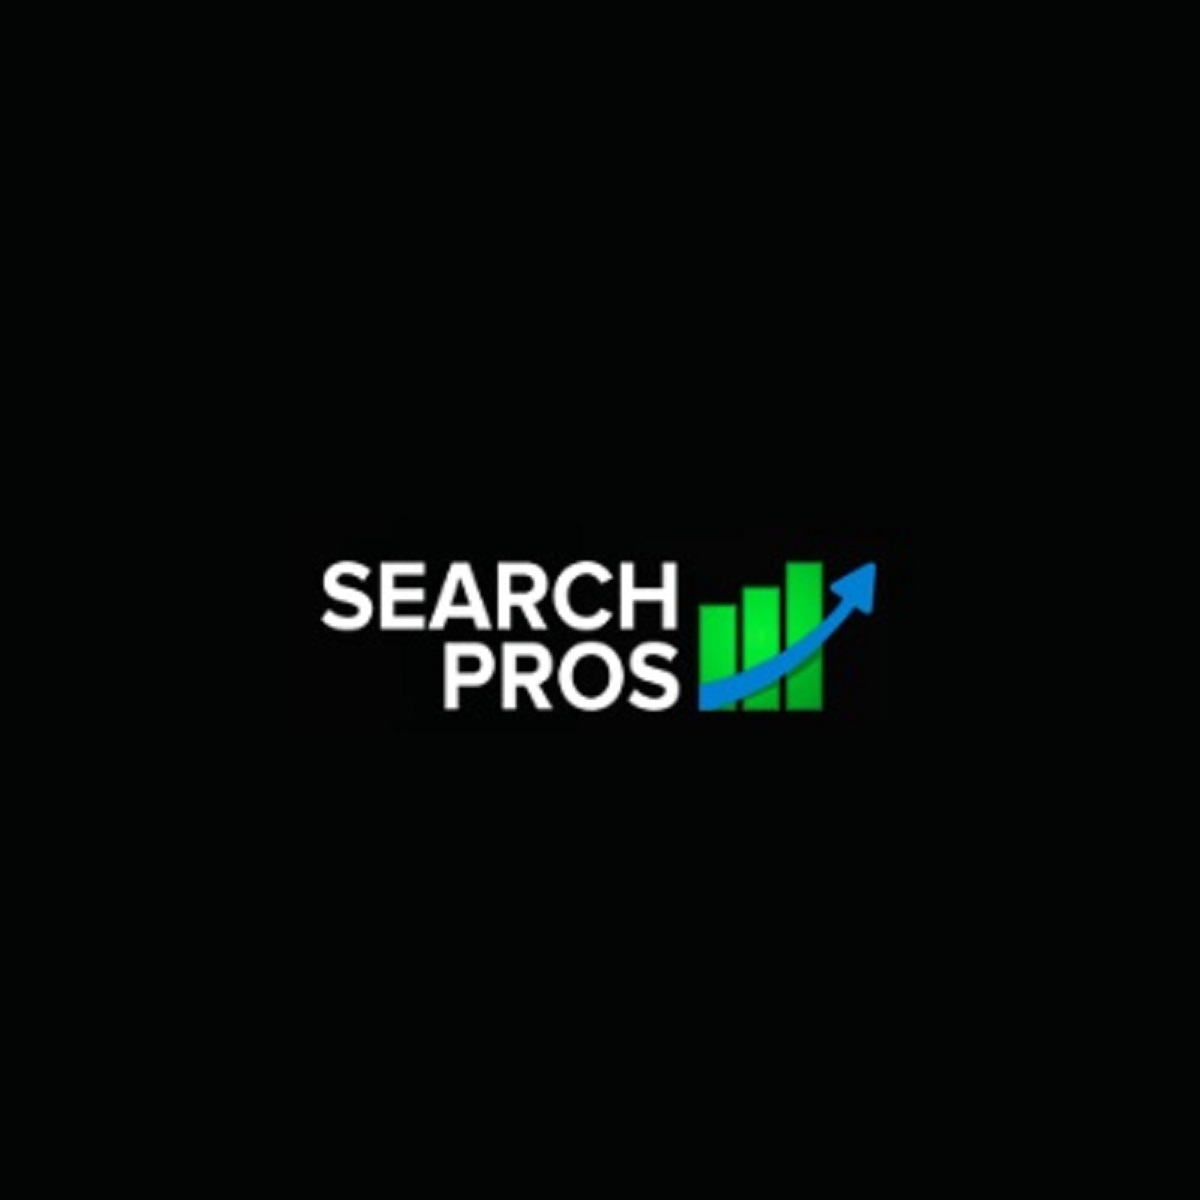 Search Pros Cover Image